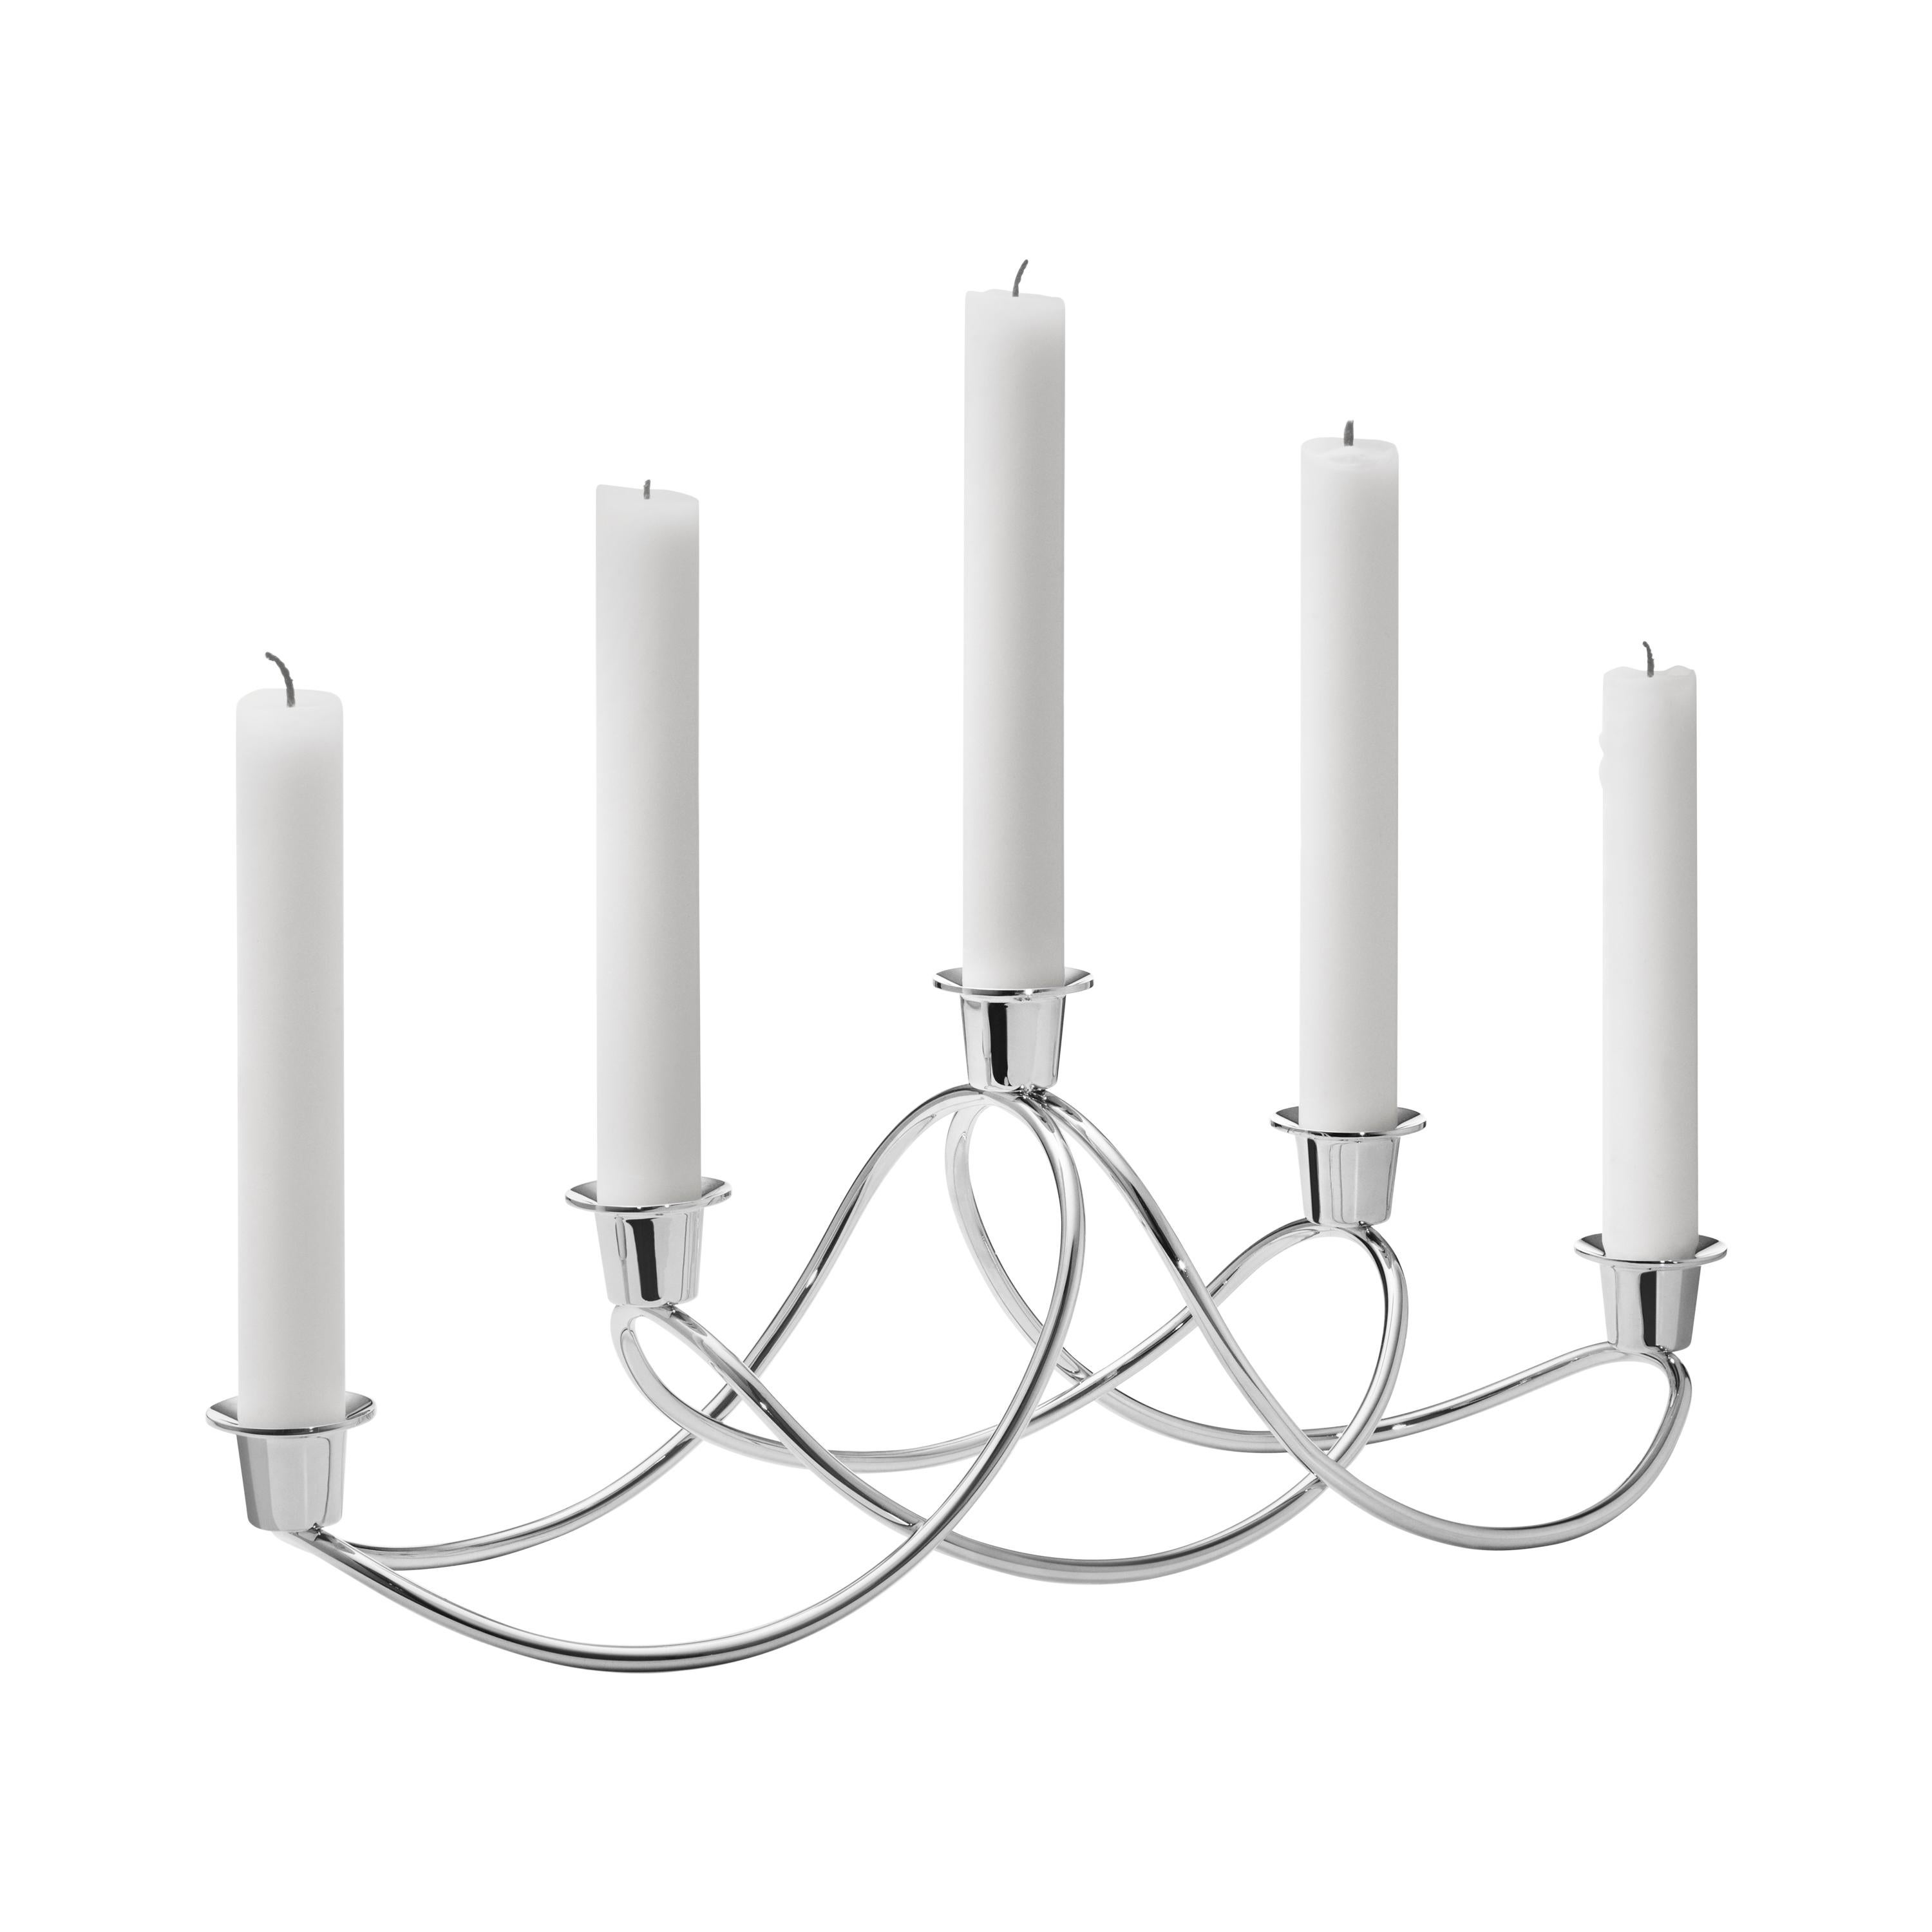 Georg Jensen Harmony Candleholder in Stainless Steel by Maria Berntsen For Sale